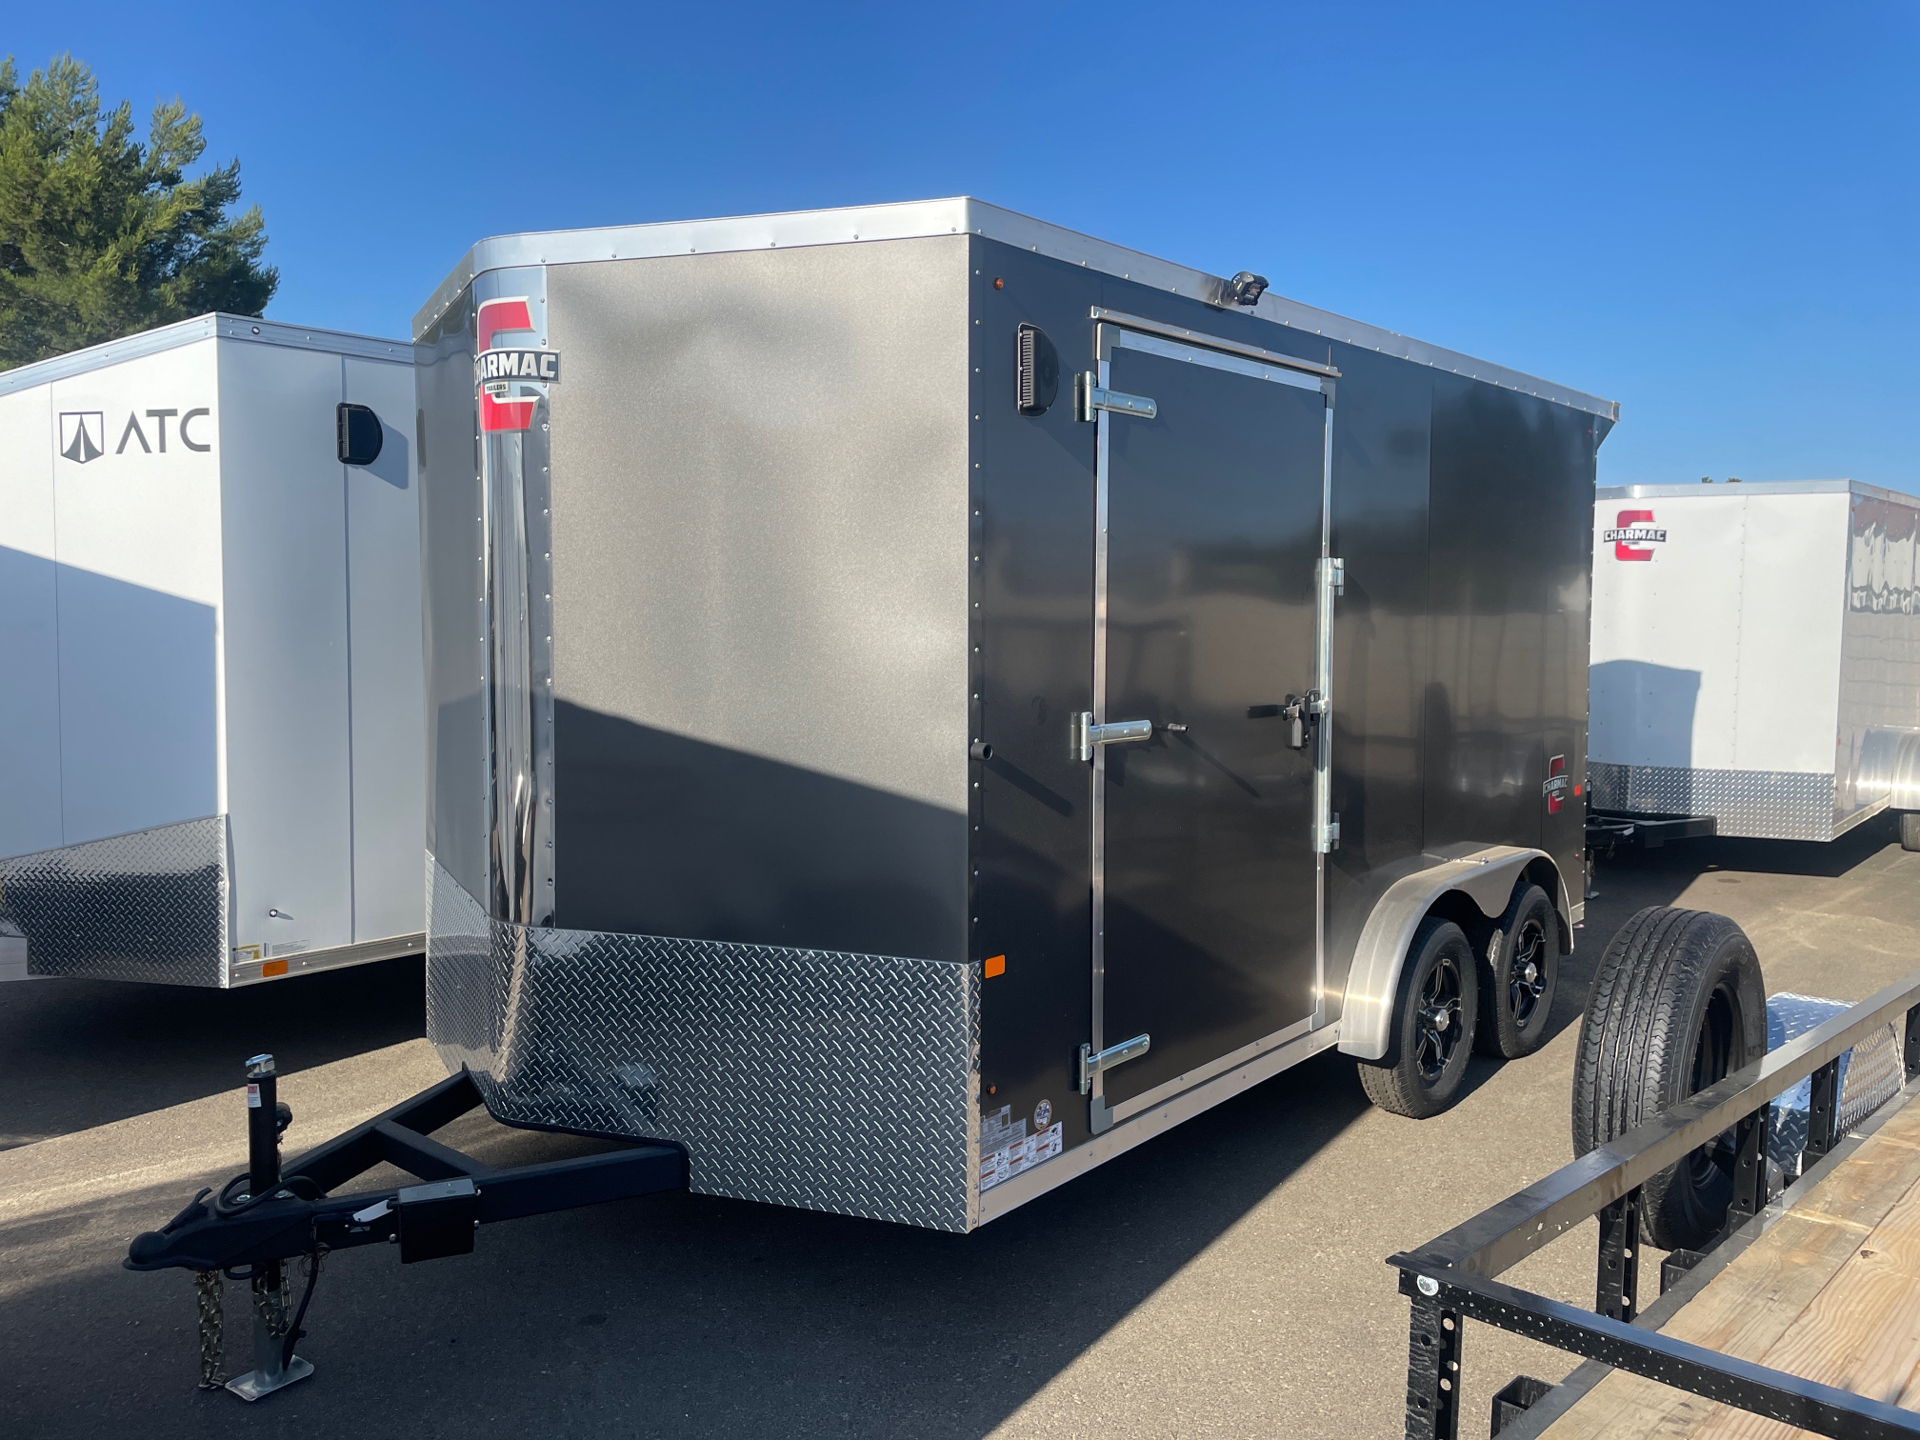 2023 Charmac Trailers 7.5X14 CARGO STEALTH in Paso Robles, California - Photo 1